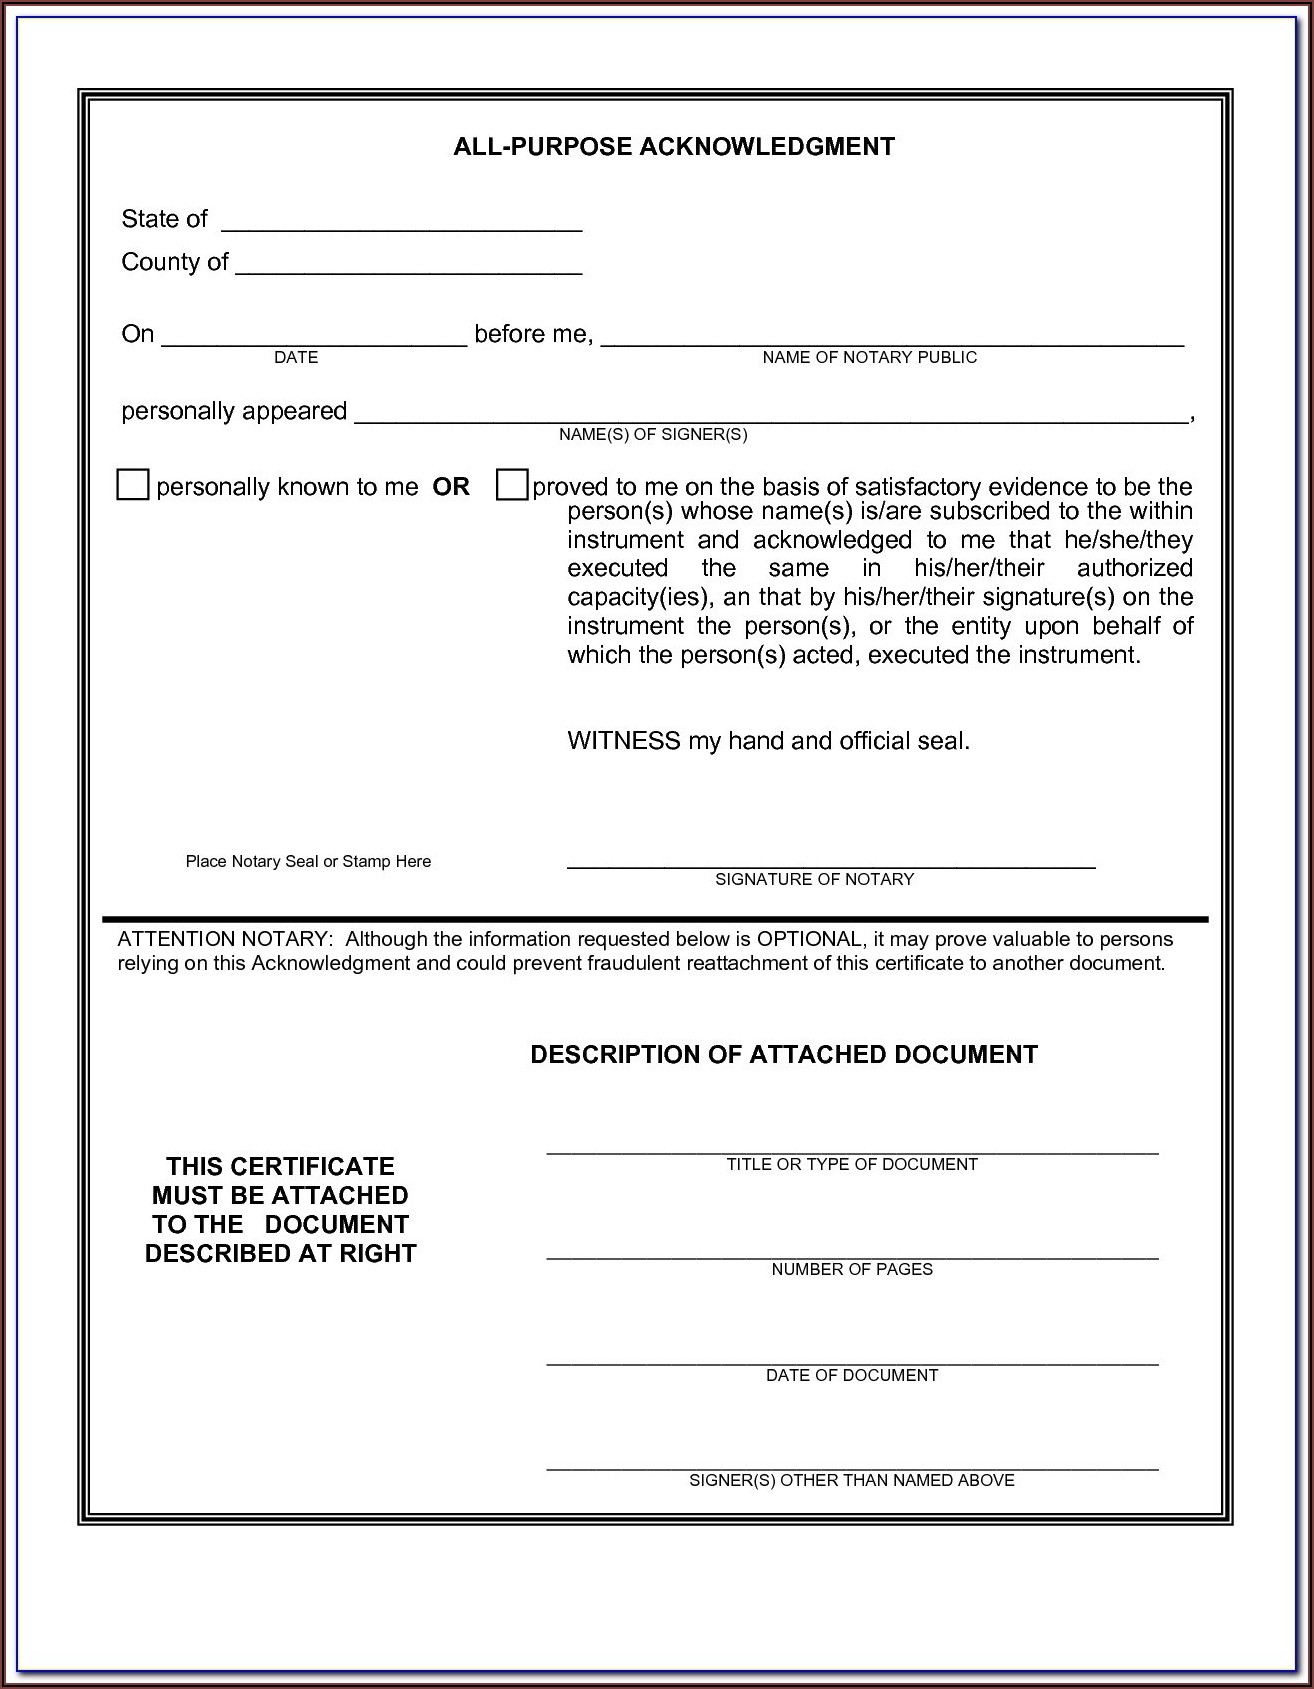 Texas Notary Forms Of Identification